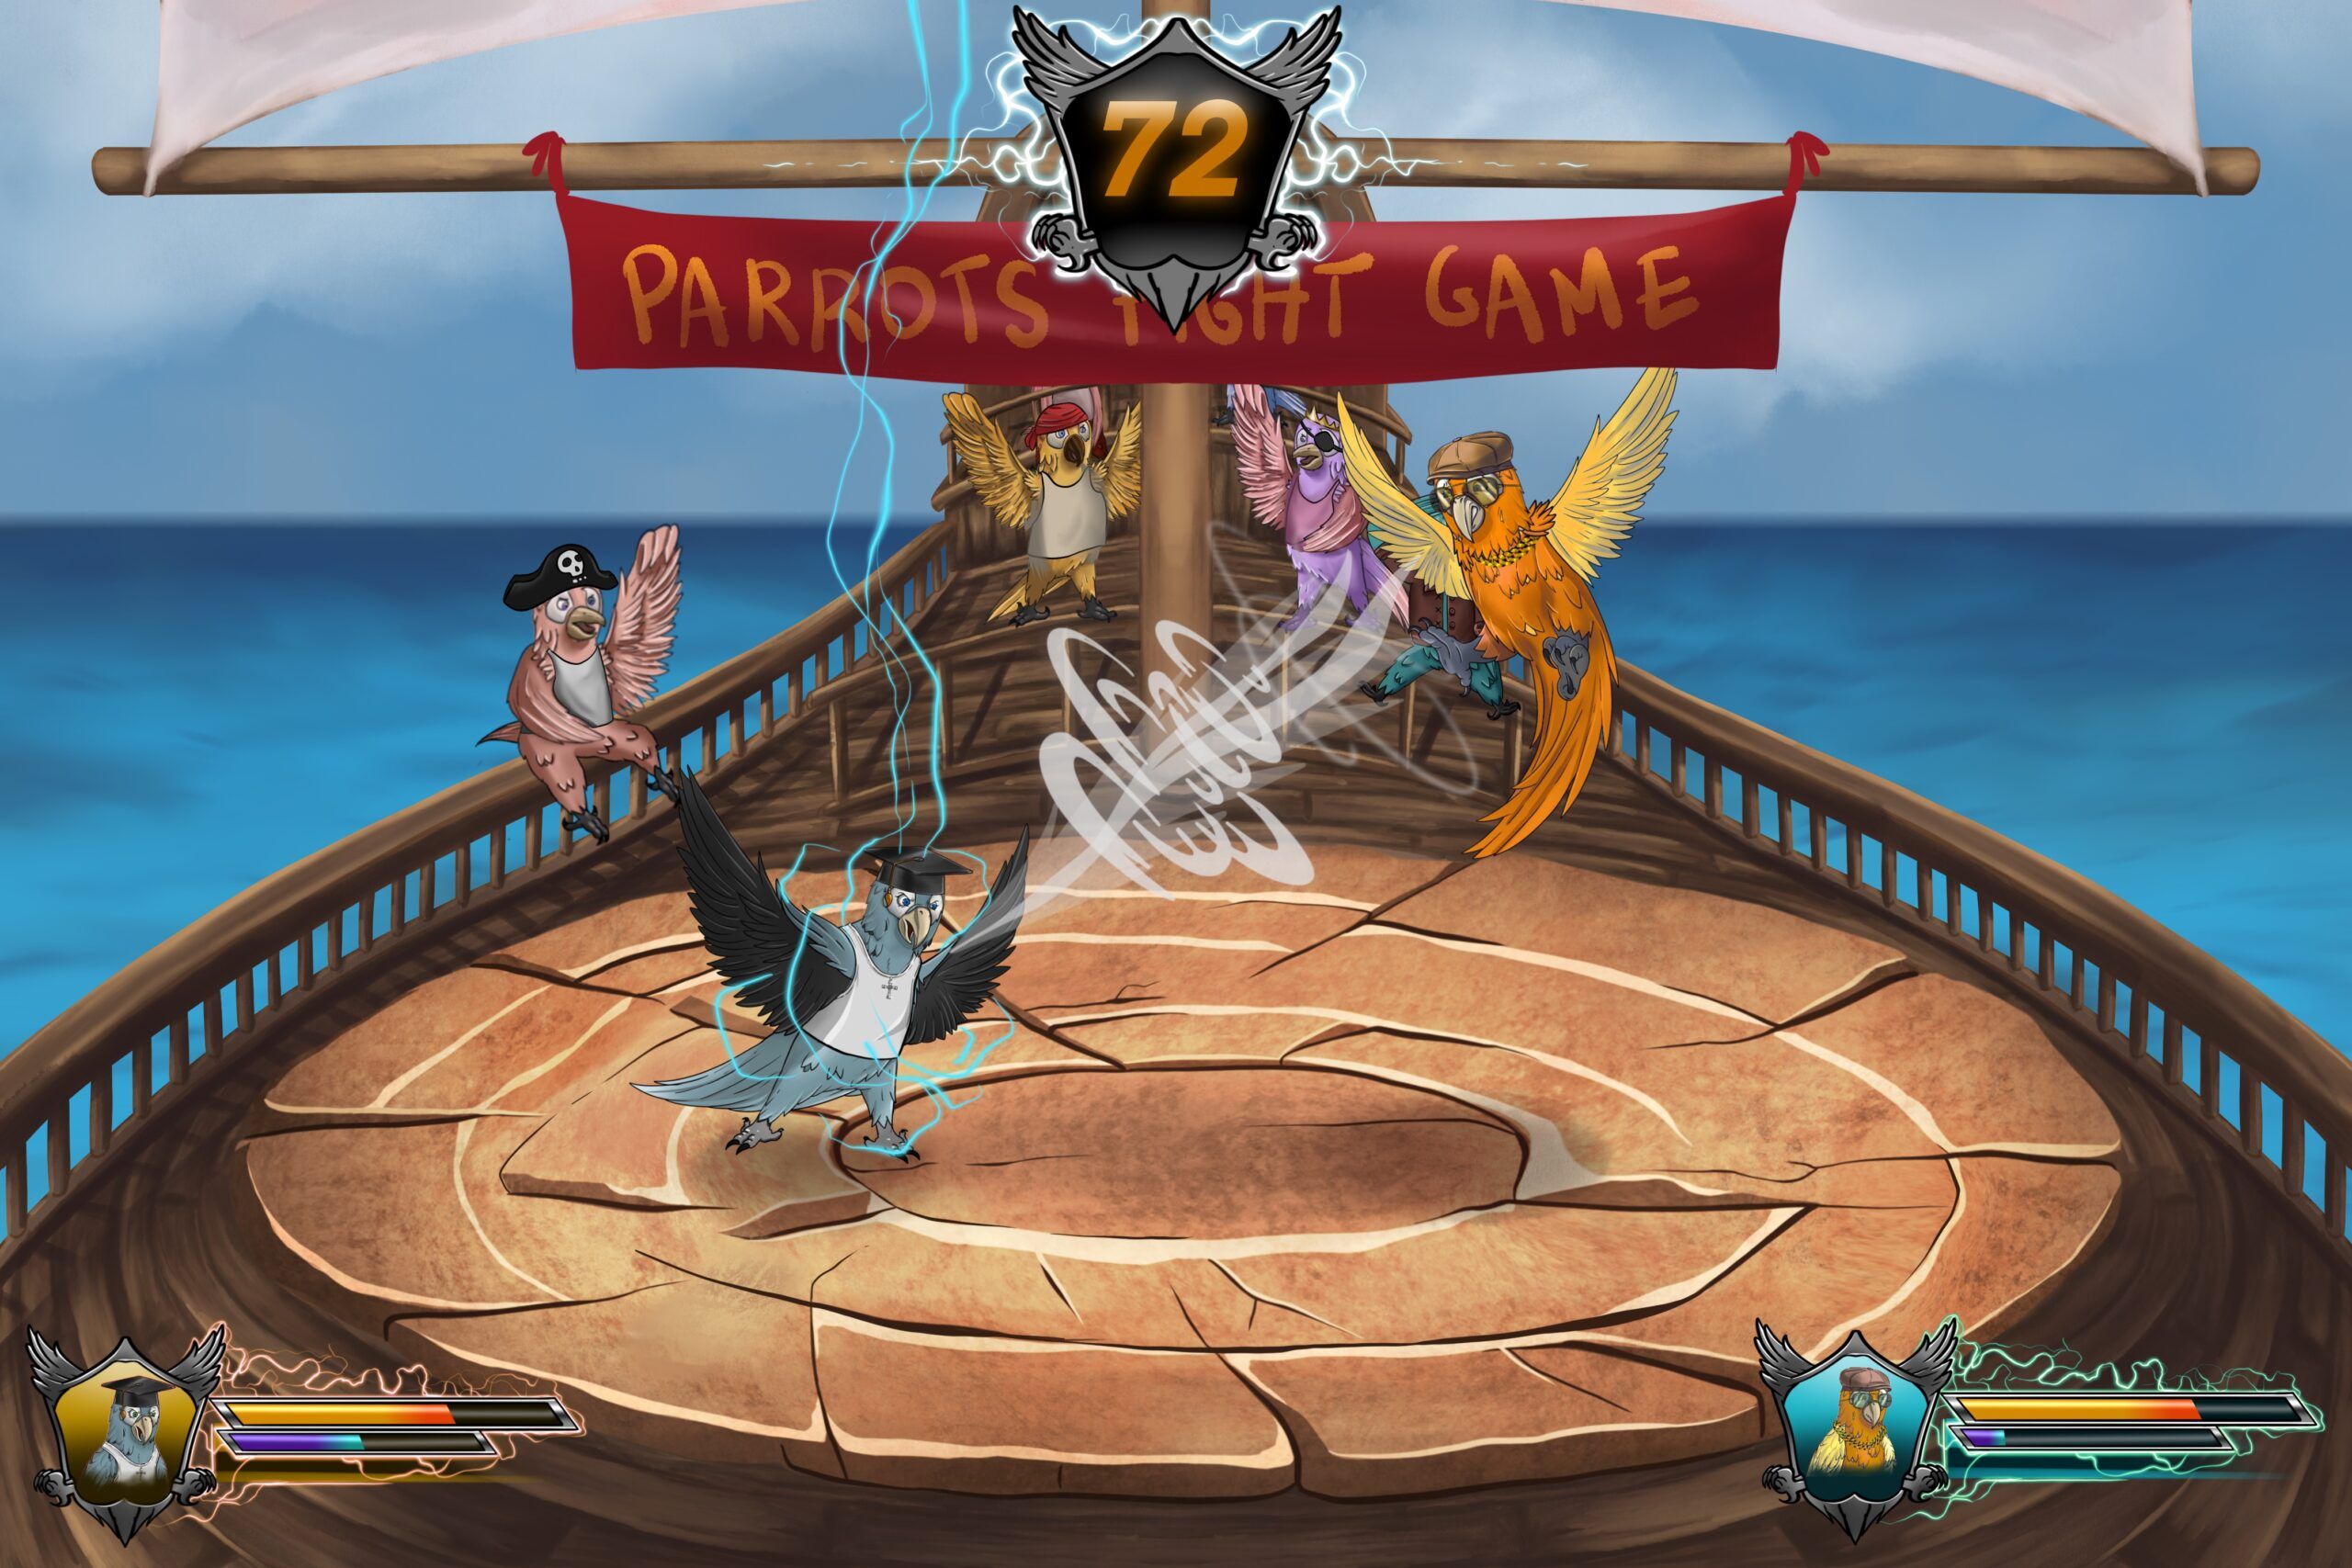 Play-to-earn NFT Game Parrots' Fight Club Launches NFT collection